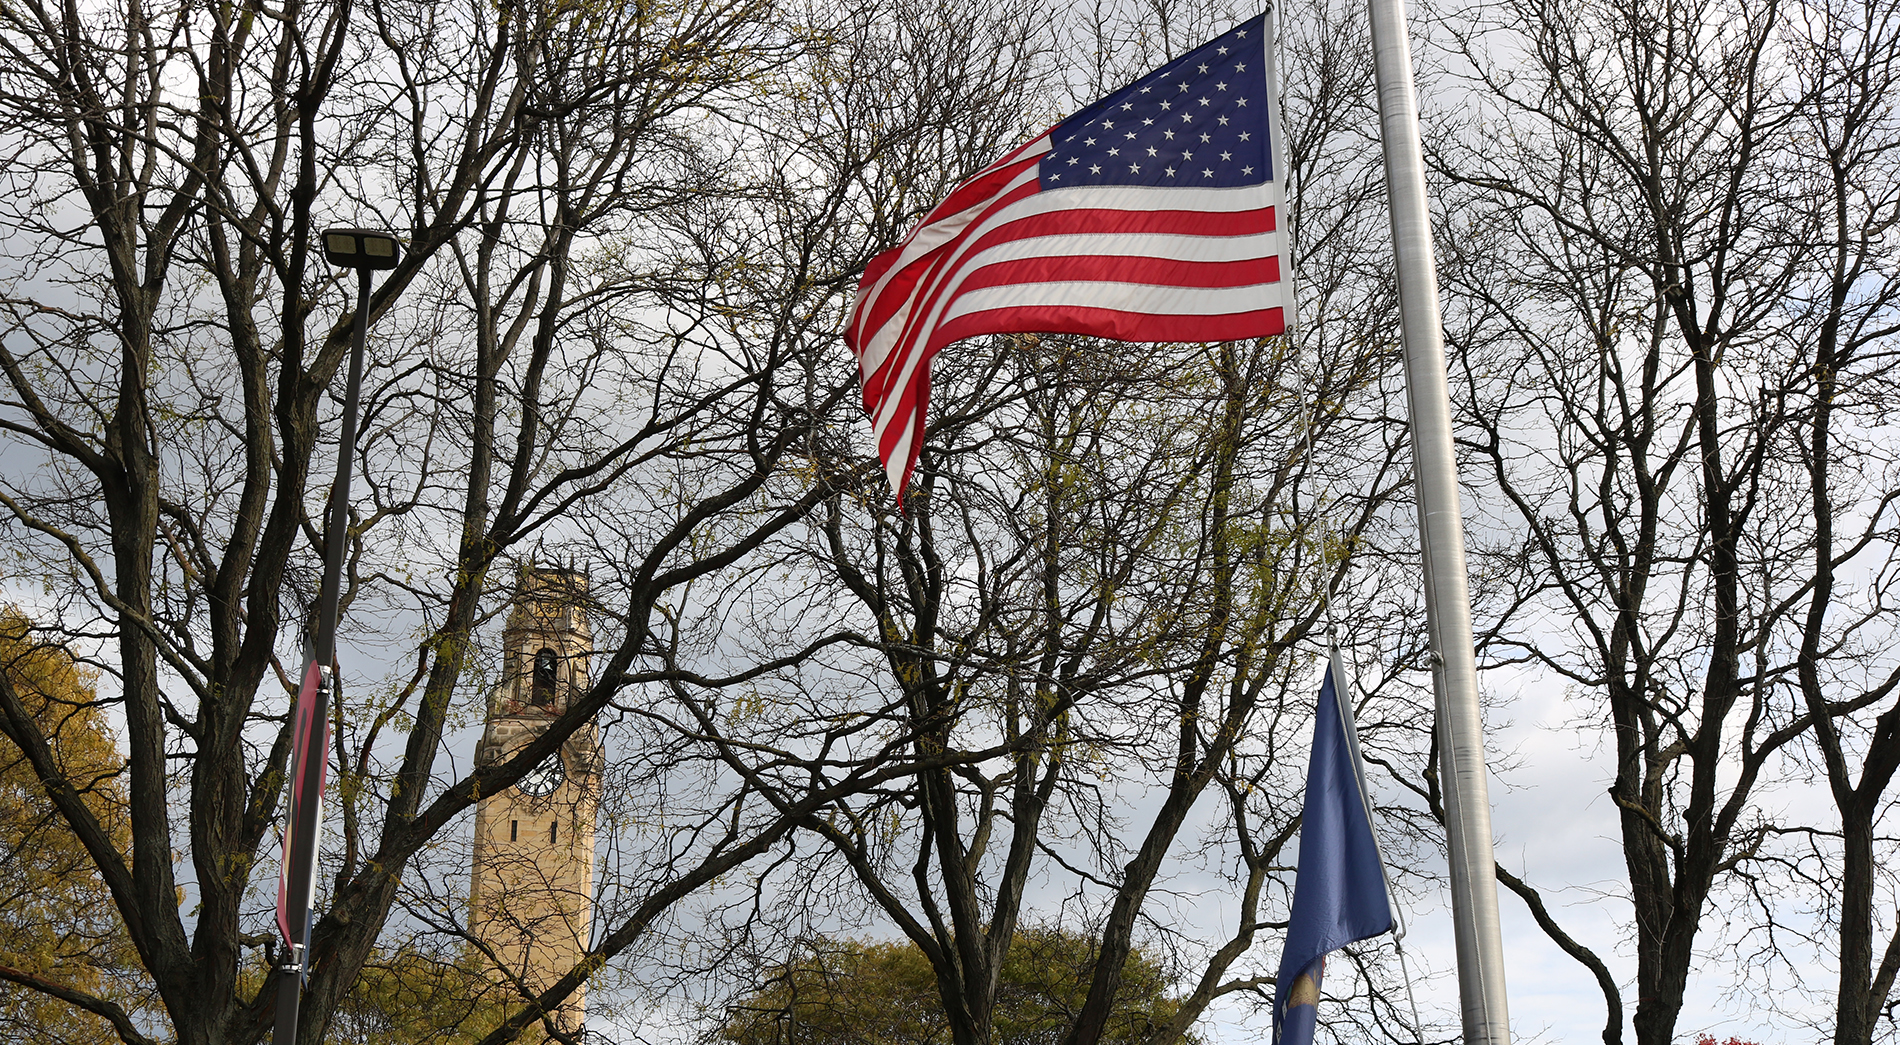 An American flag waves in the breeze on Detroit Mercy's McNichols Campus. In the background, the clocktower is visible, beneath trees and foliage.